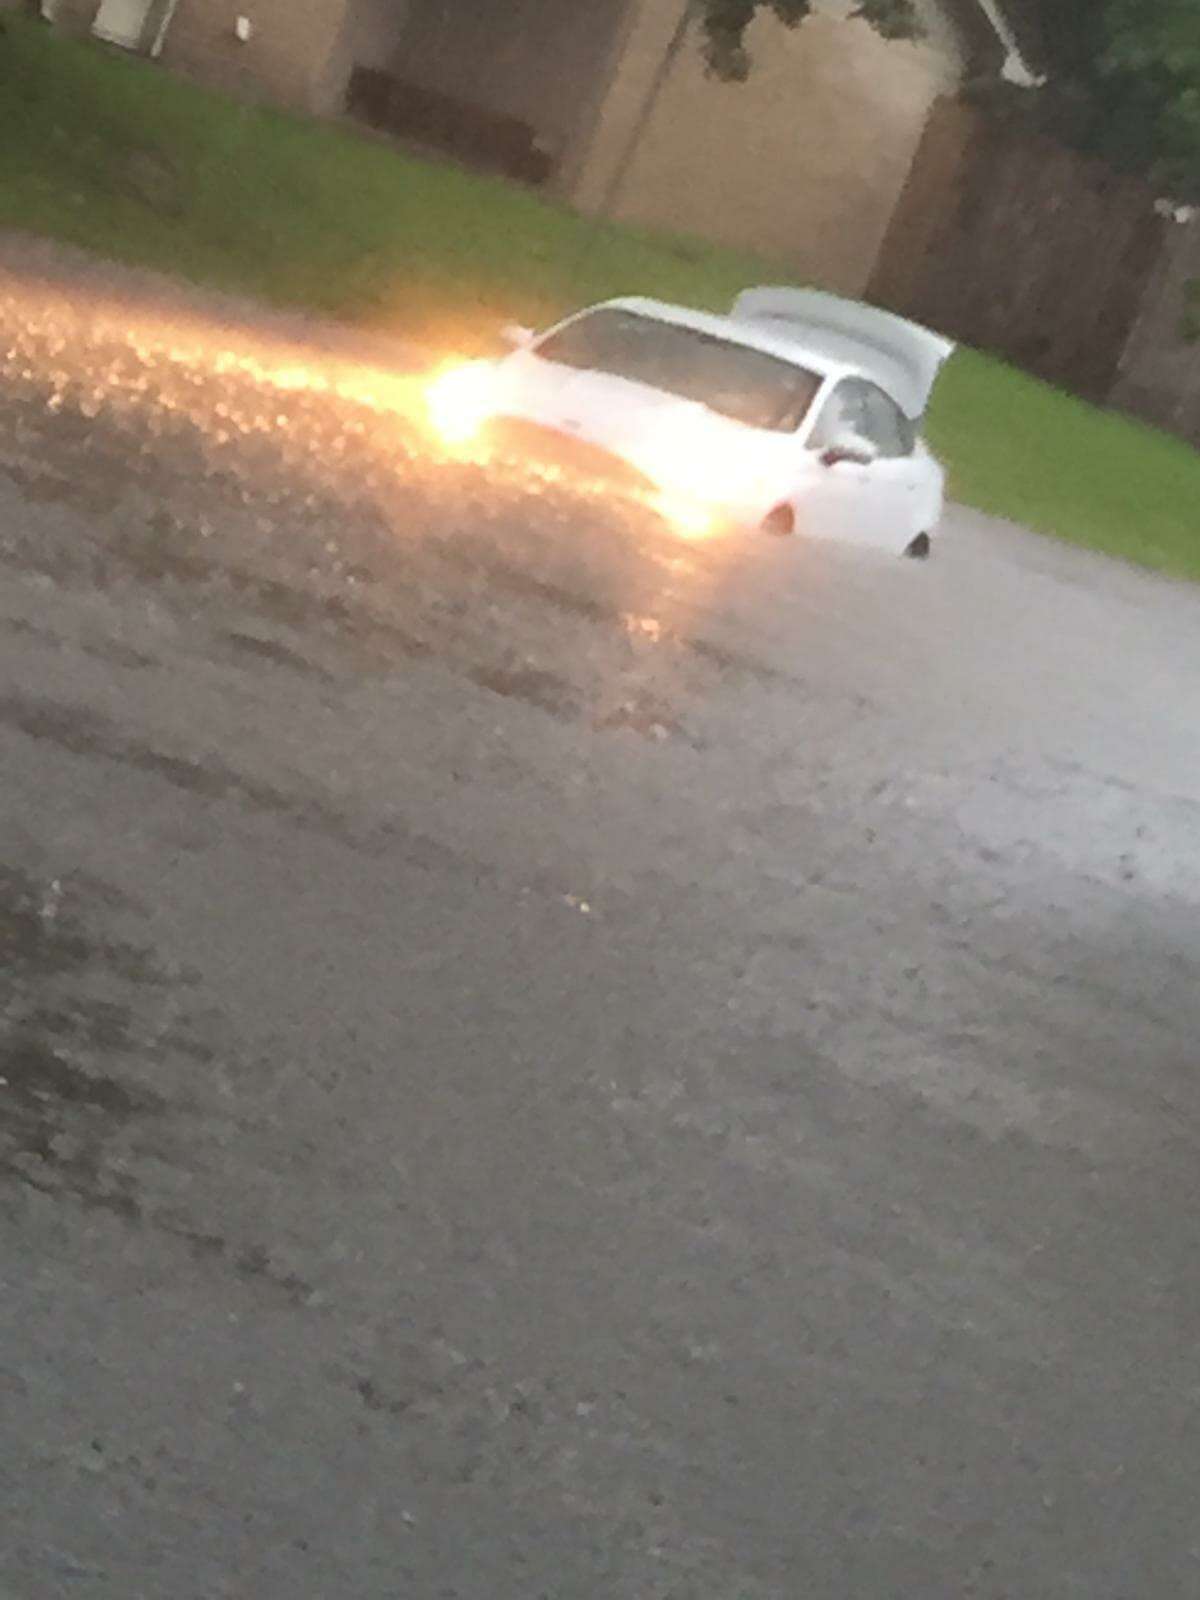 A stalled car that Javier Osornio spotted while he was driving into Kingwood on Tuesday.